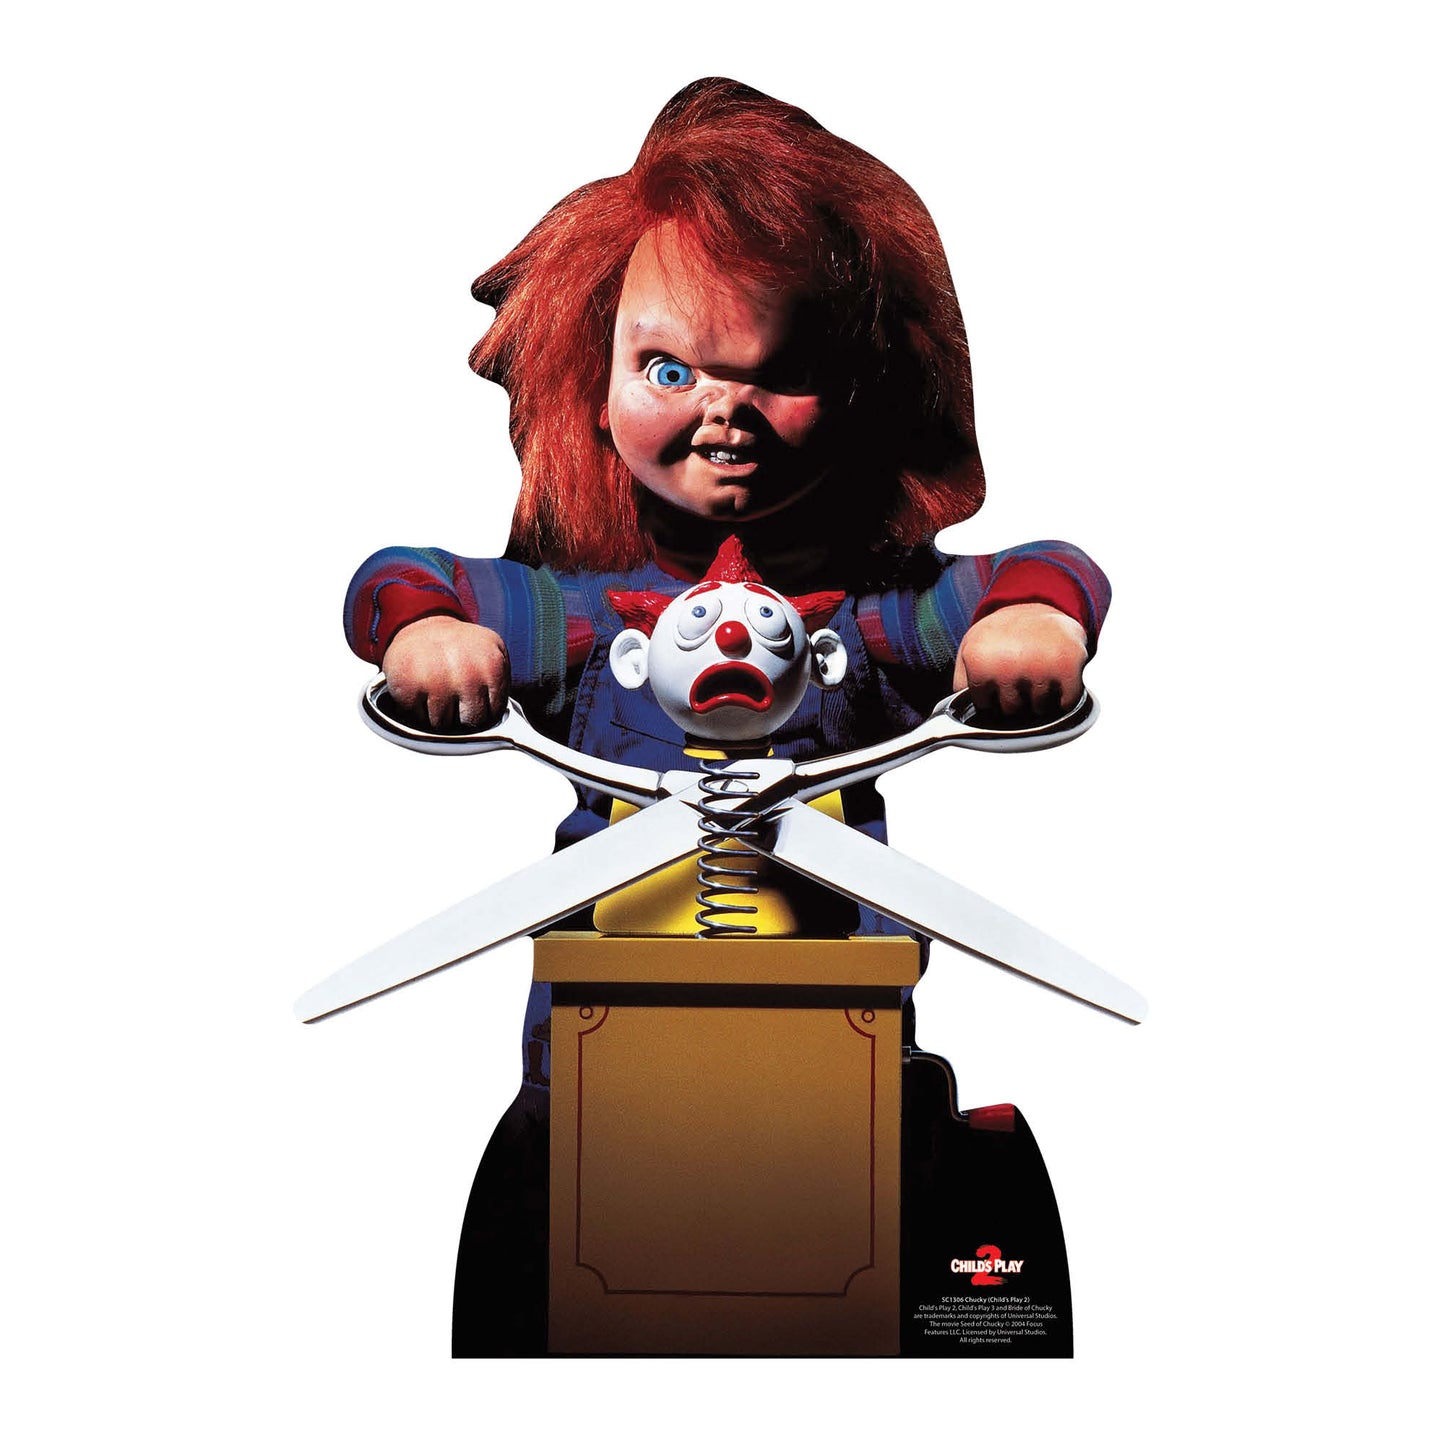 SC1306 Chucky Doll with Scissors Cardboard Cut Out Height 74cm - Star Cutouts